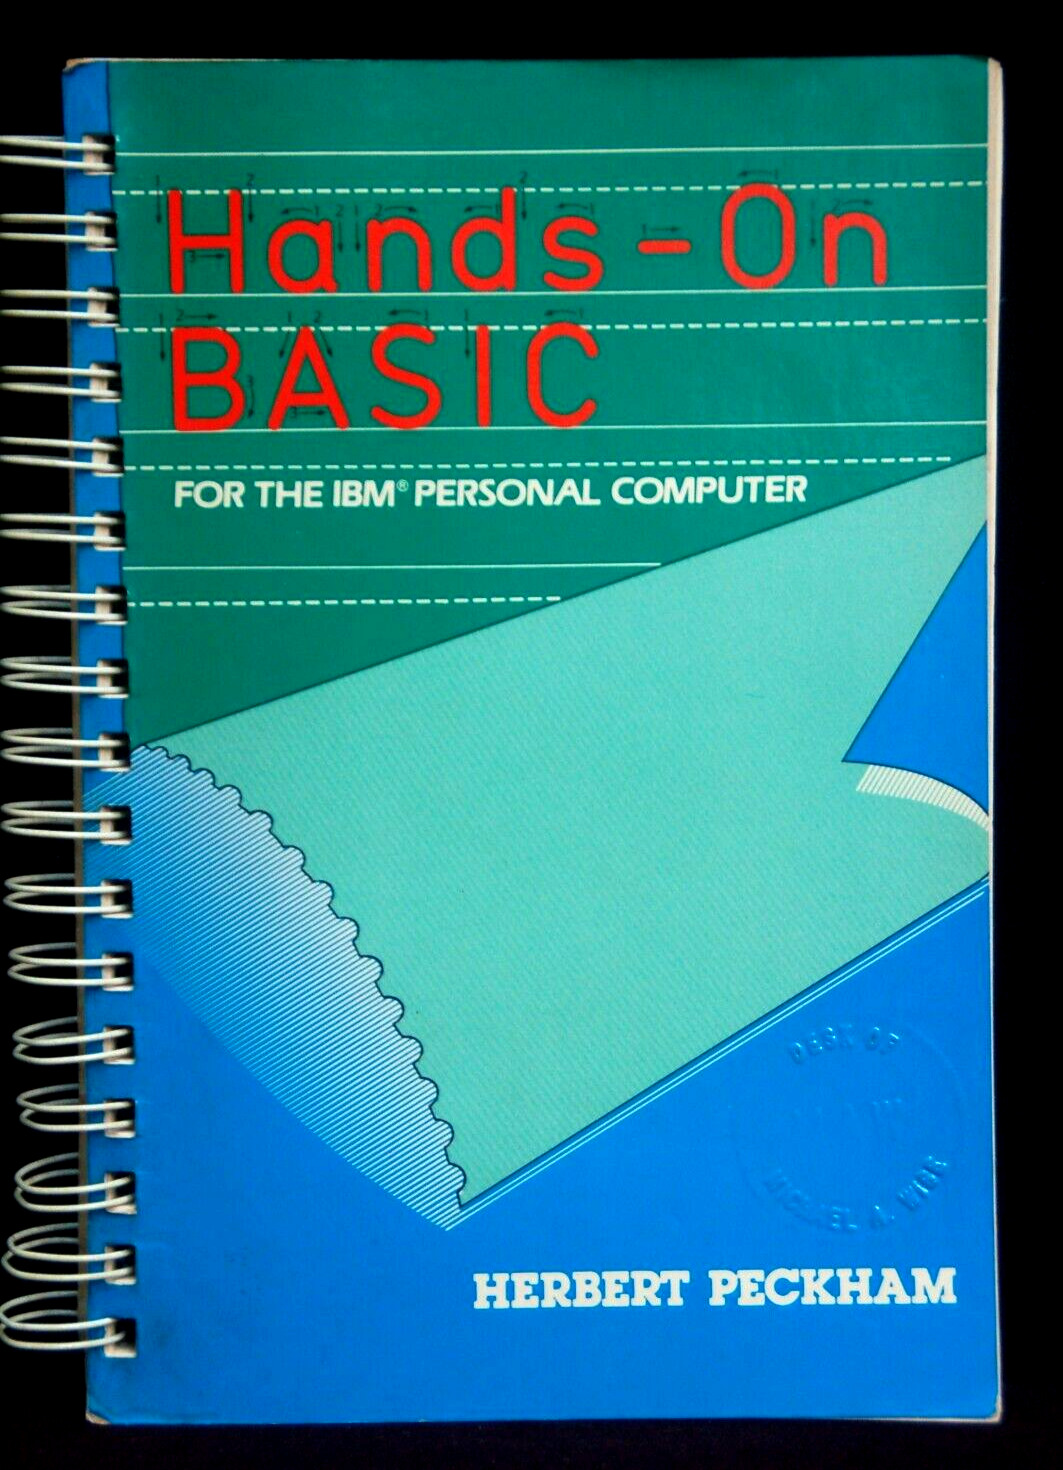 Hands-On Basic: For the IBM Personal Computer by Herbert Peckham 1983 edition SC